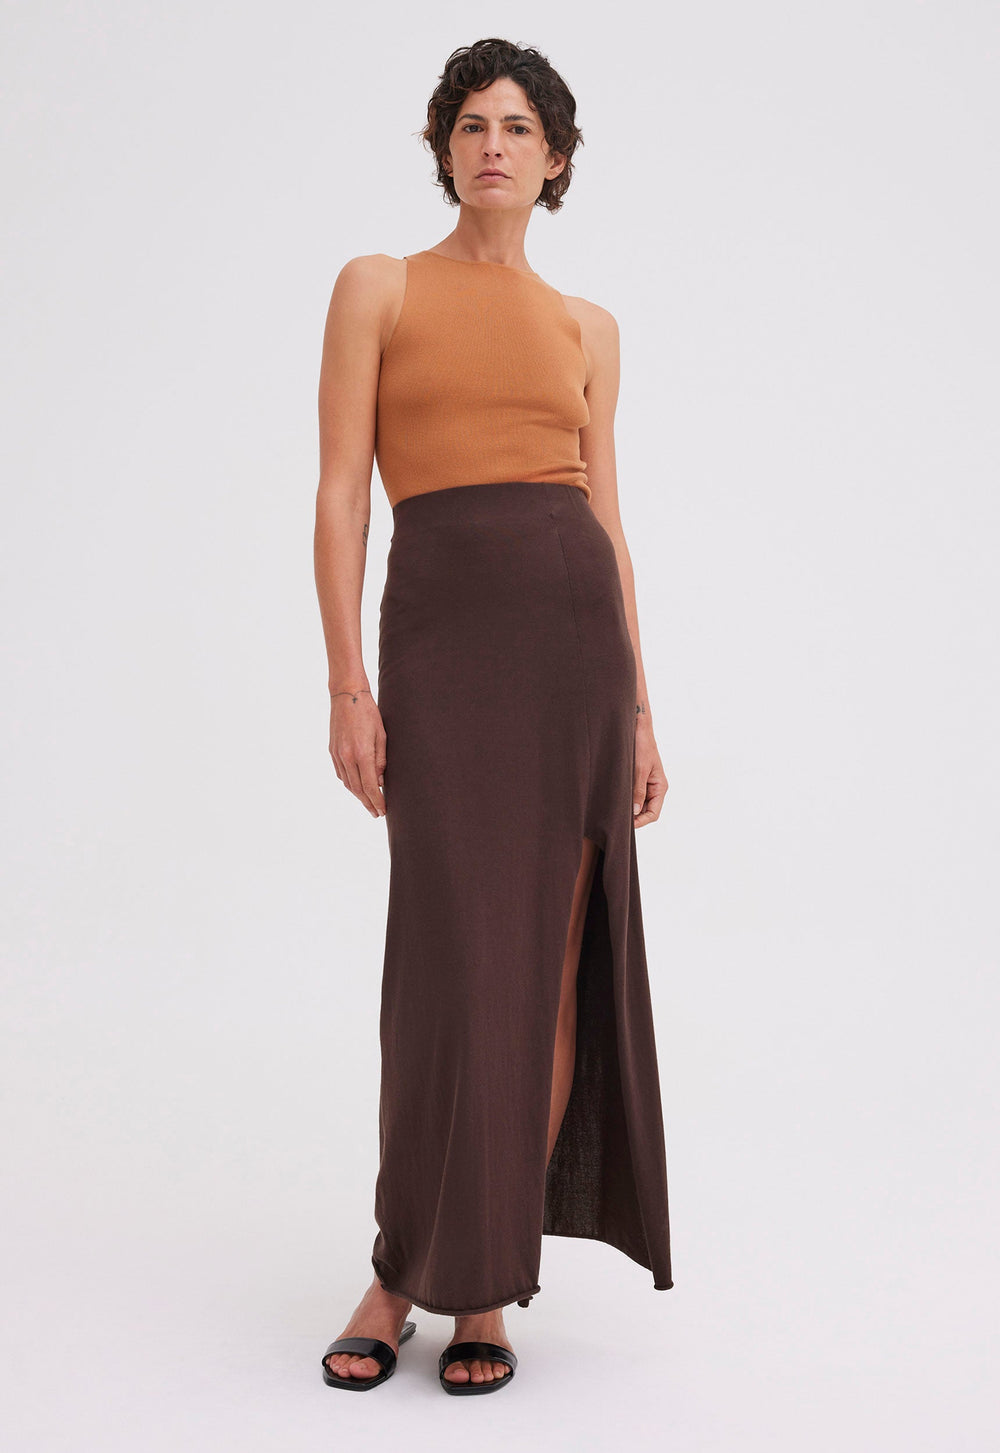 Jac+Jack FINCH COTTON SKIRT in Clove Brown